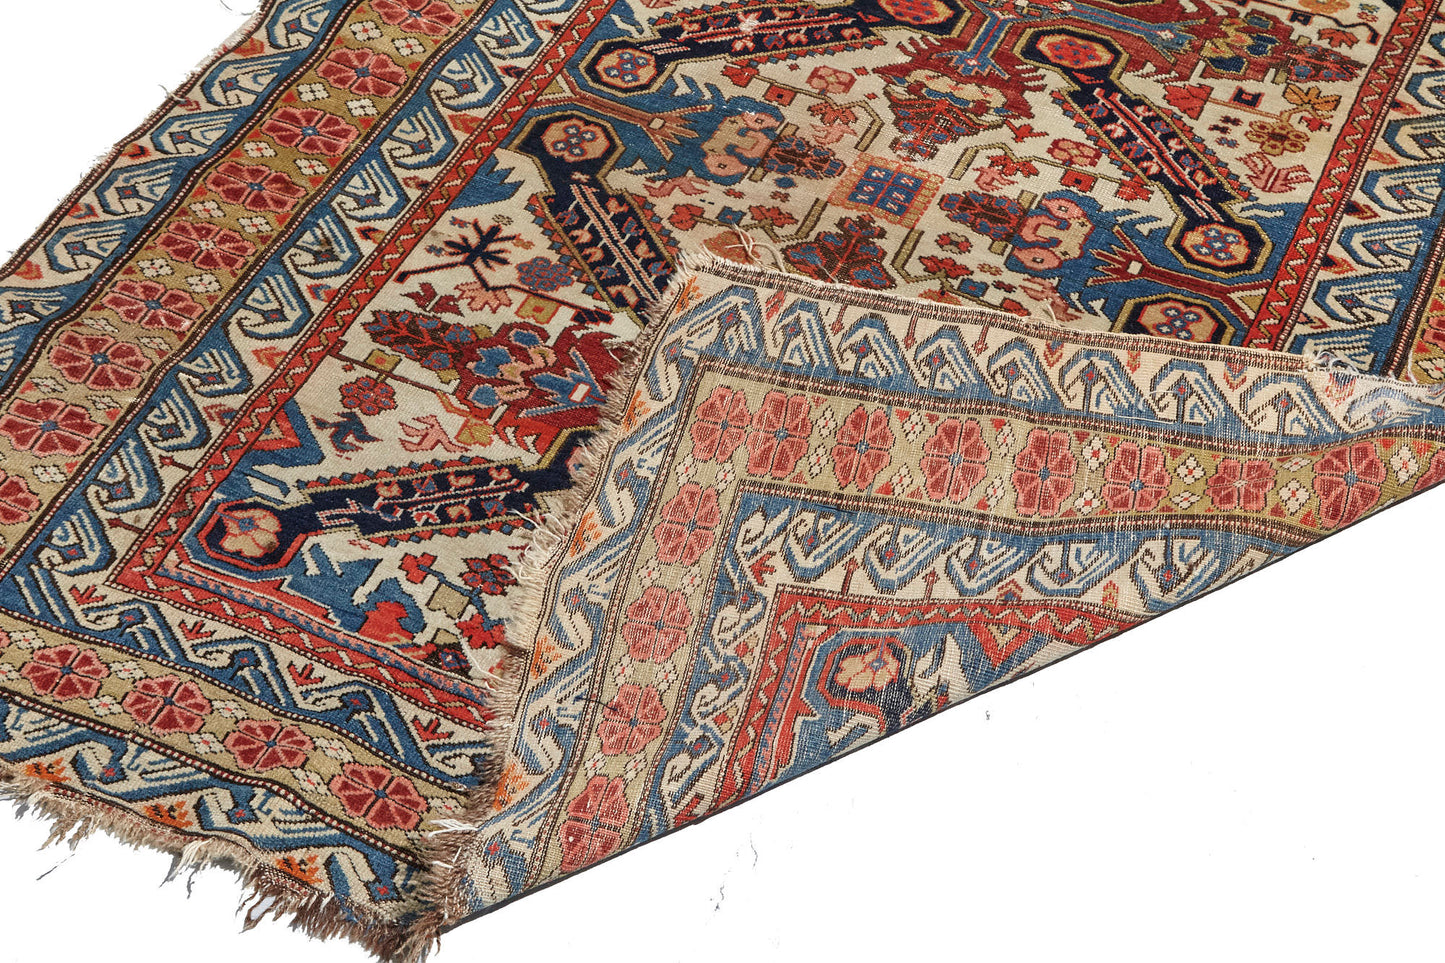 Front and back of intricately woven Zeychour Persian rug. Vibrant red and deep blue medallions with floral motifs throughout and border with red flowers and blue and white wave pattern. Available from King Kennedy Rugs Los Angeles